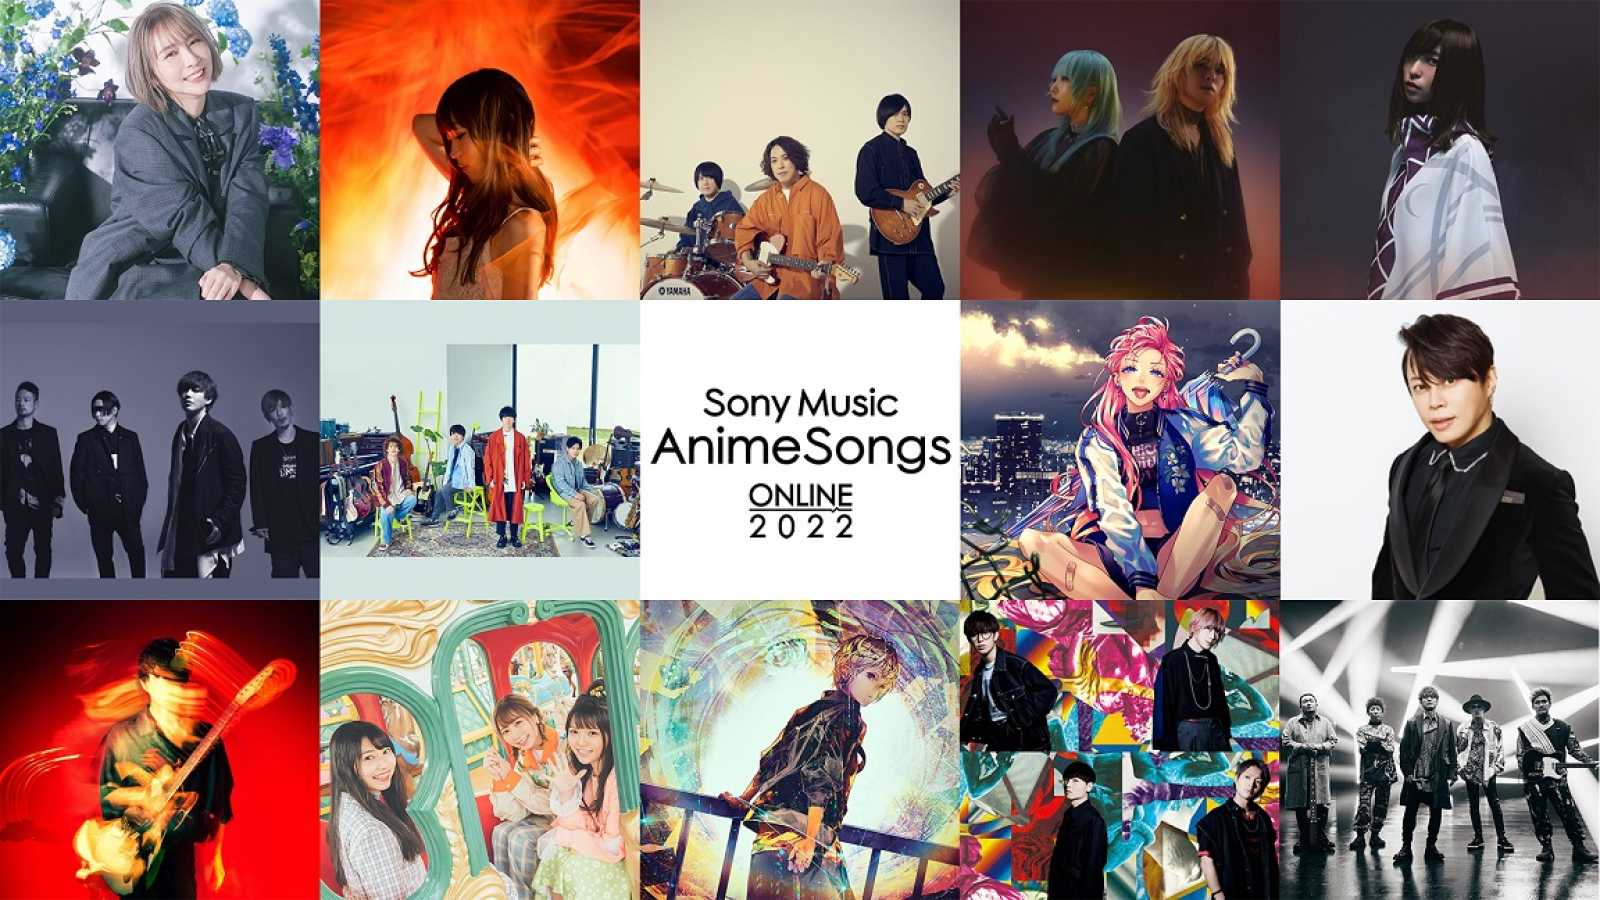 "Sony Music AnimeSongs ONLINE 2022" to Be Live Streamed in 20 Countries © Sony Music Entertainment (Japan) Inc. / Sony Music Labels Inc. All rights reserved